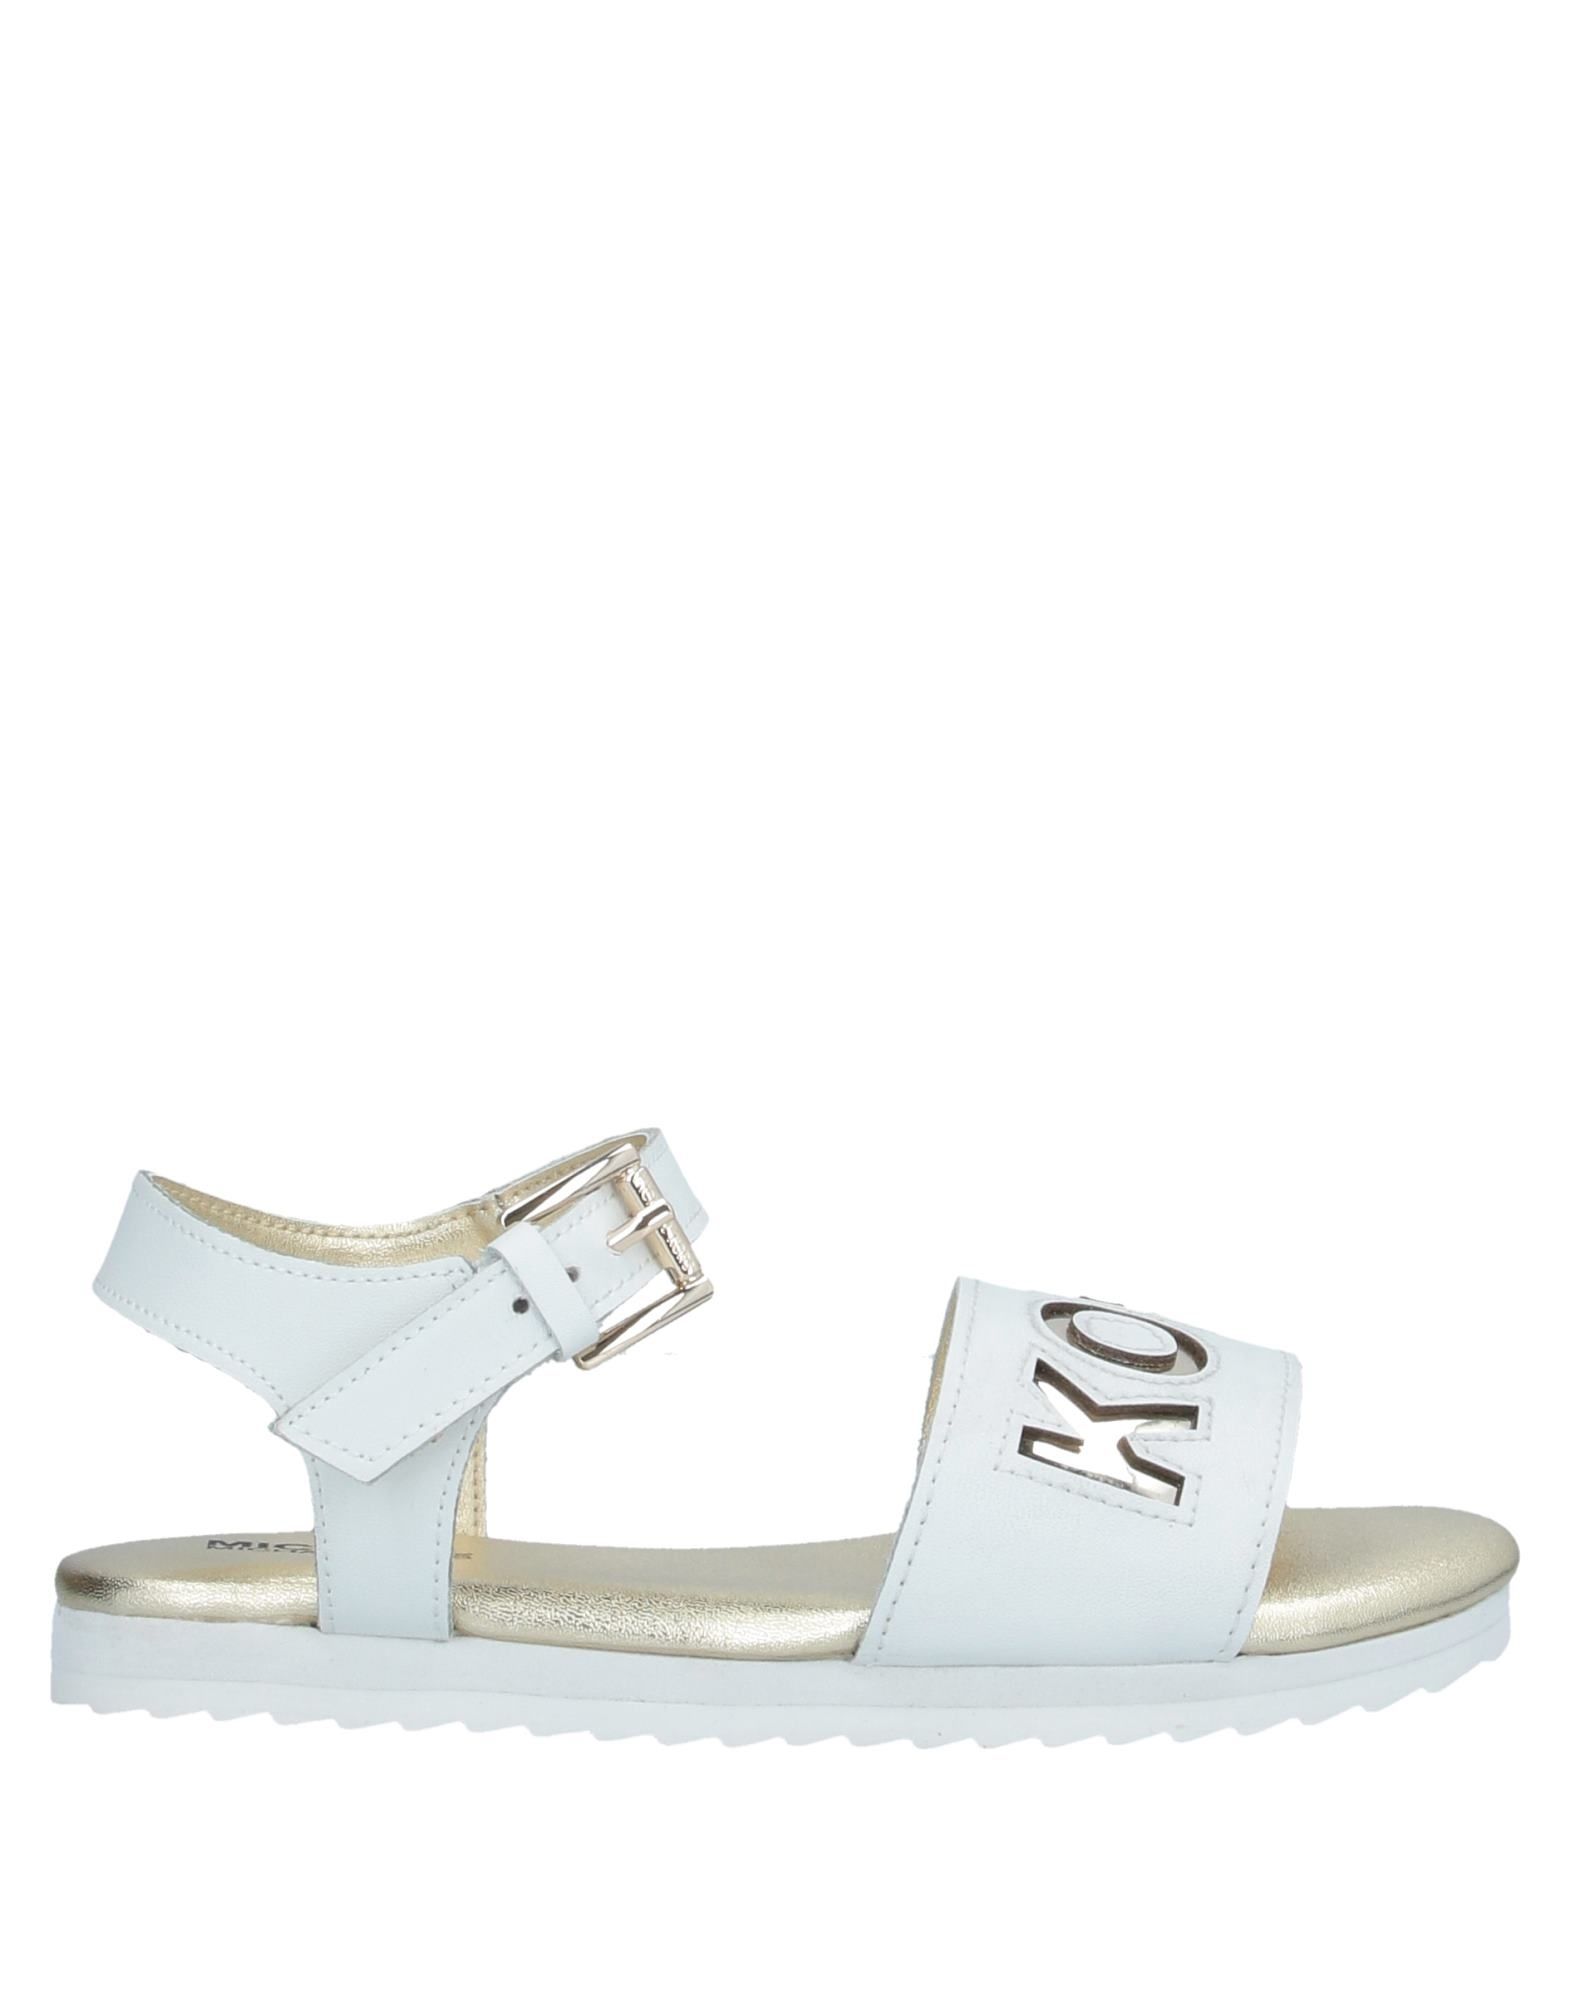 MICHAEL MICHAEL KORS MICHAEL MICHAEL KORS TODDLER GIRL SANDALS WHITE SIZE 8C SOFT LEATHER,11881974CL 11